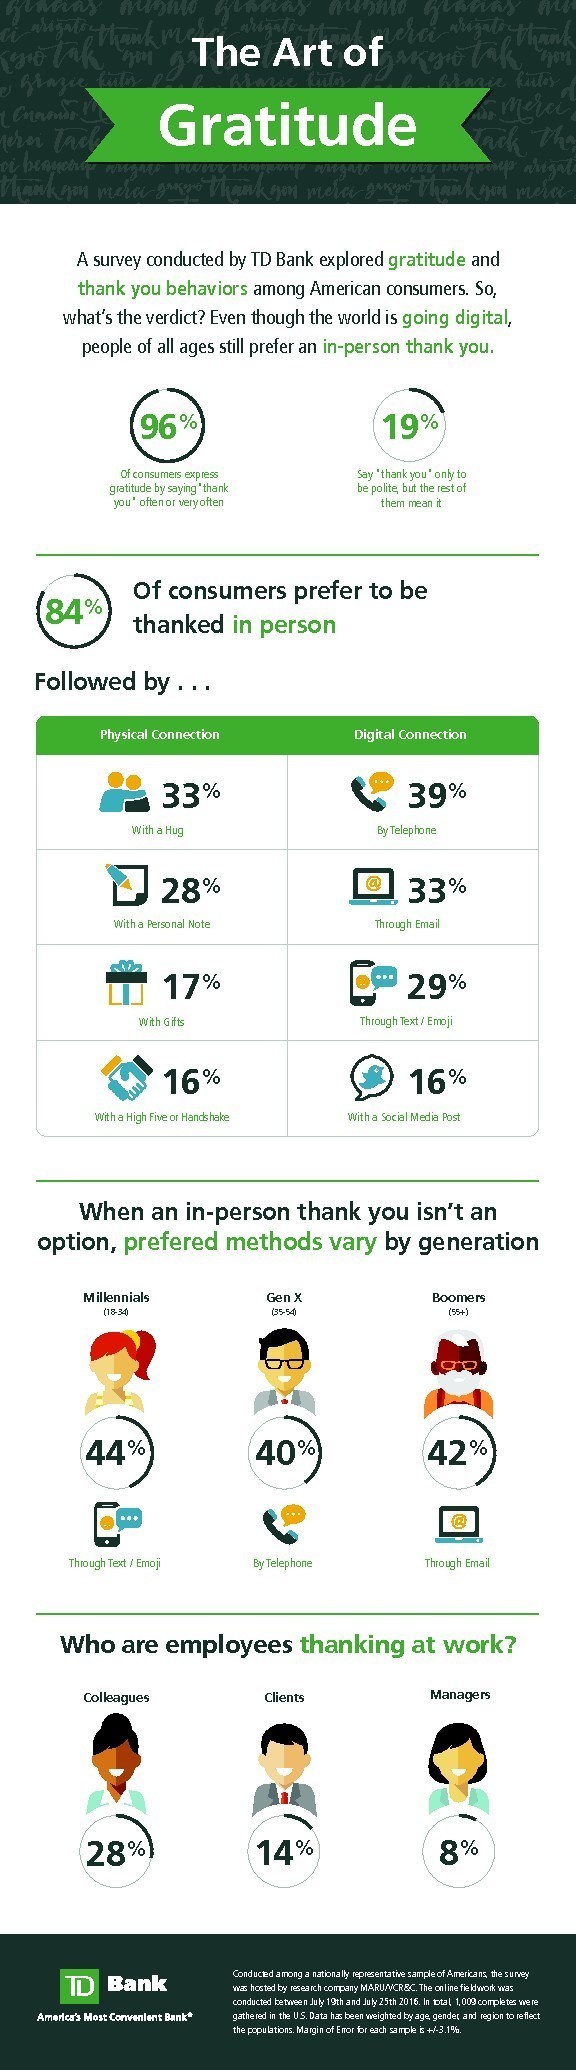 TD Bank Releases Data About Effective Ways To Thank ...